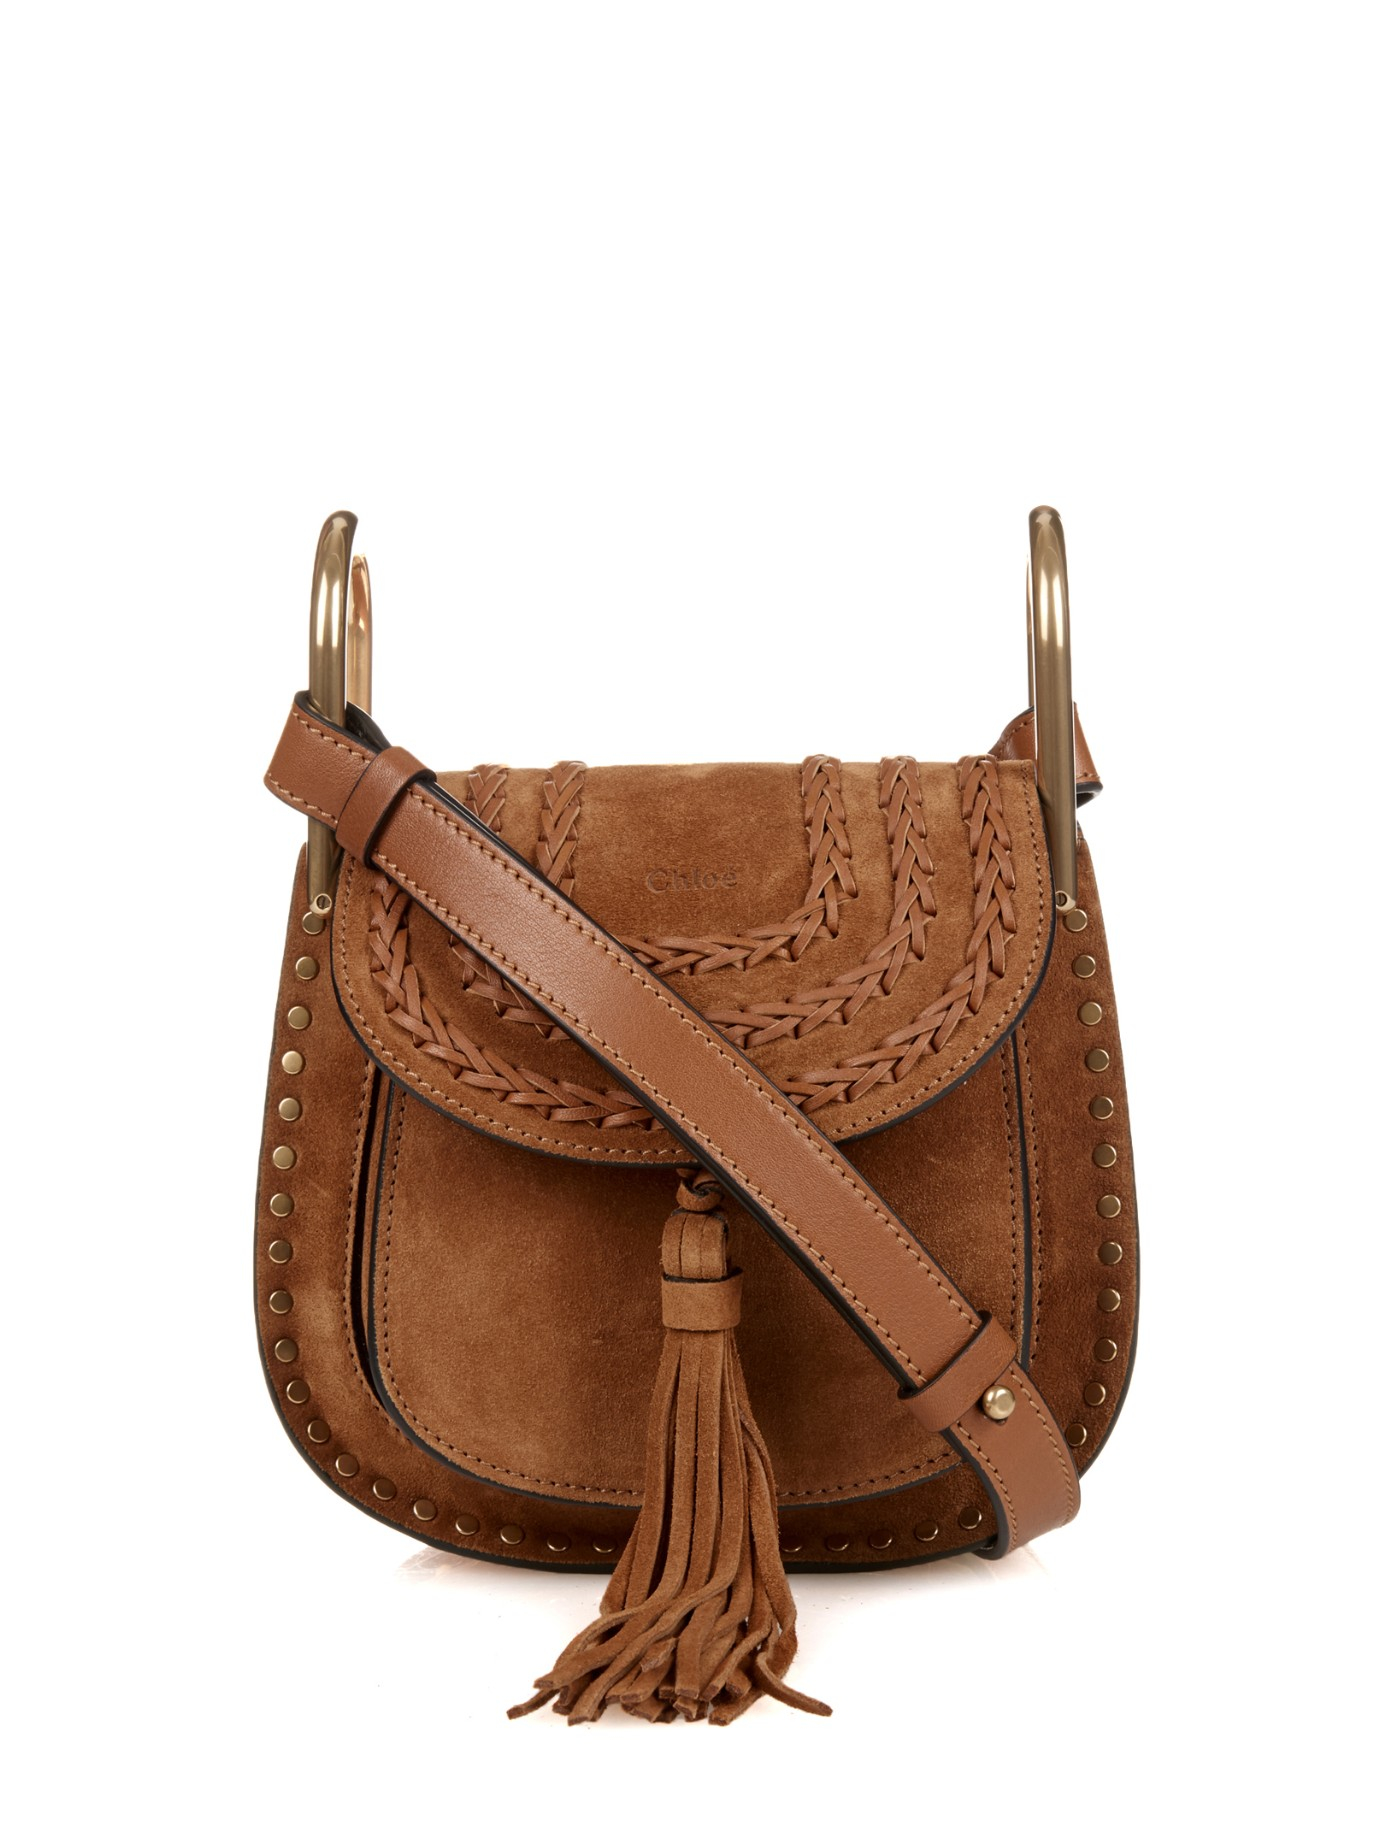 Lyst - Chloé Hudson Small Suede Cross-Body Bag in Brown